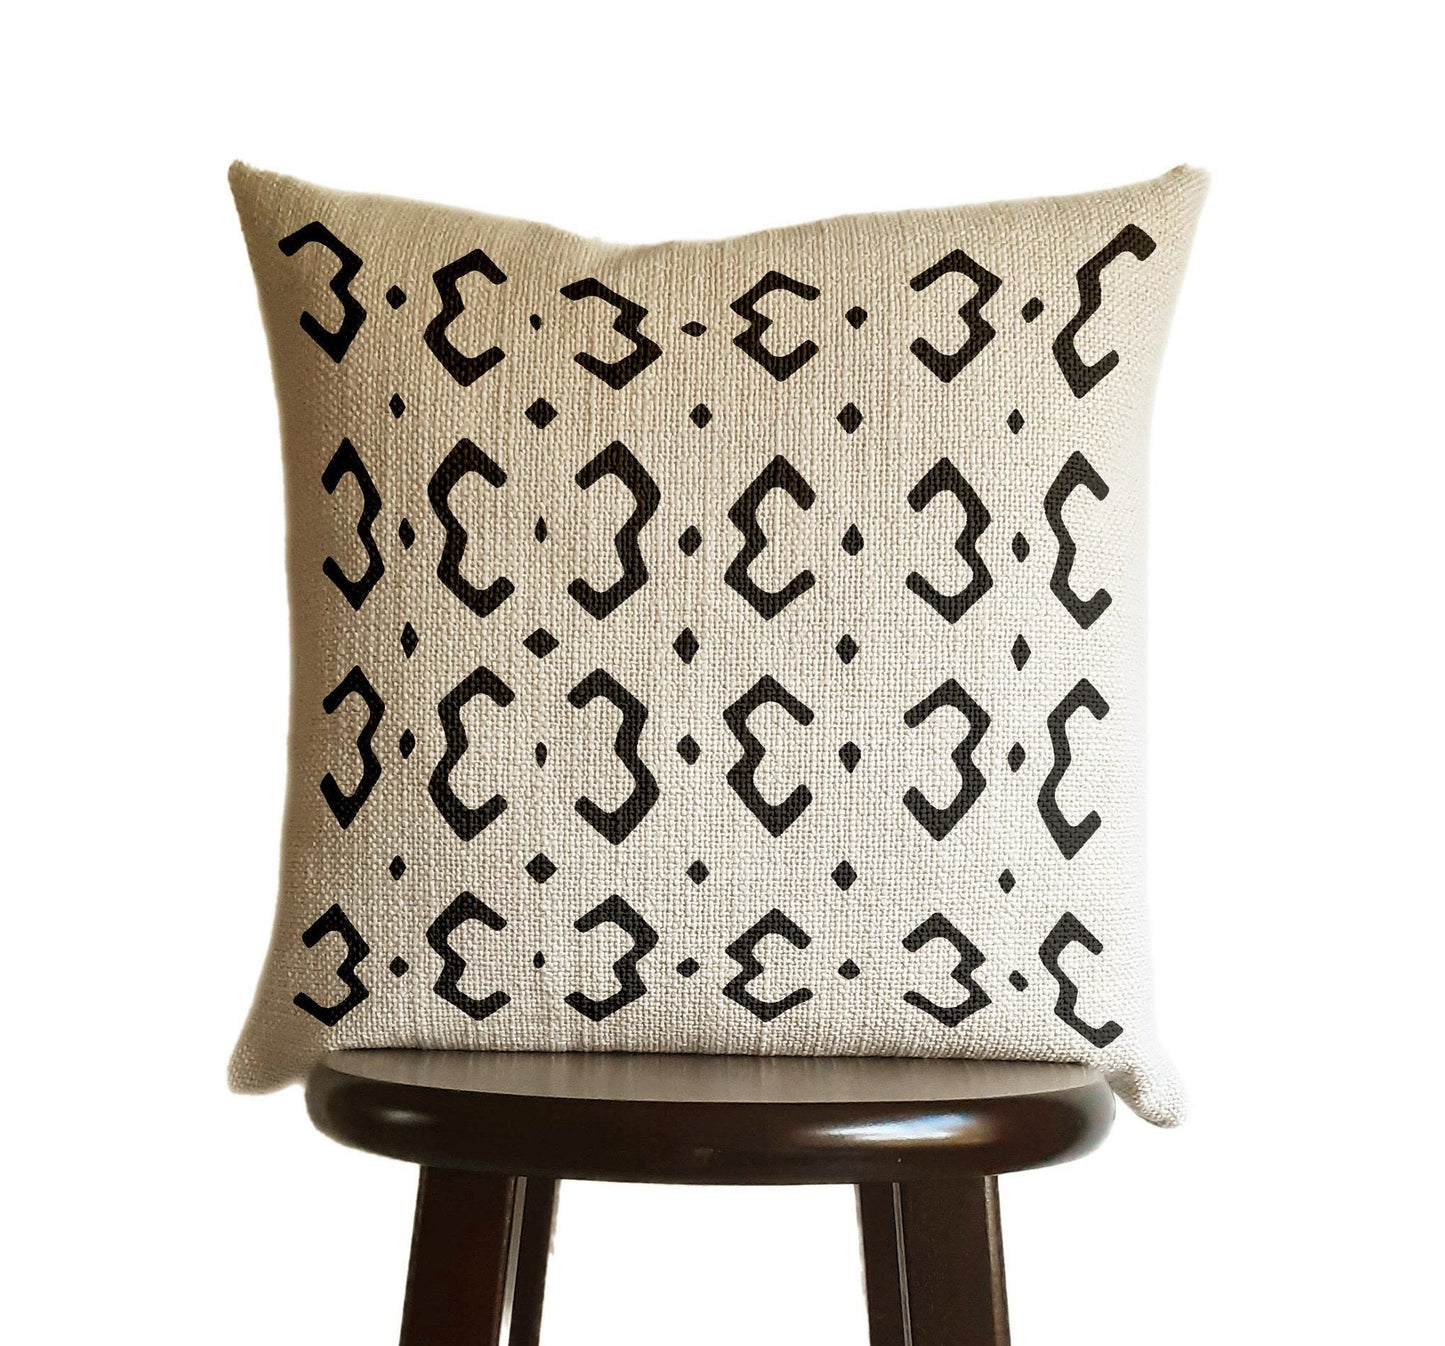 Black and Ivory Pillow Cover, Tribal Urban Ethnic Square 18x18 in Natural Oatmeal Color Textured Woven Fabric in Modern Boho Home Decor